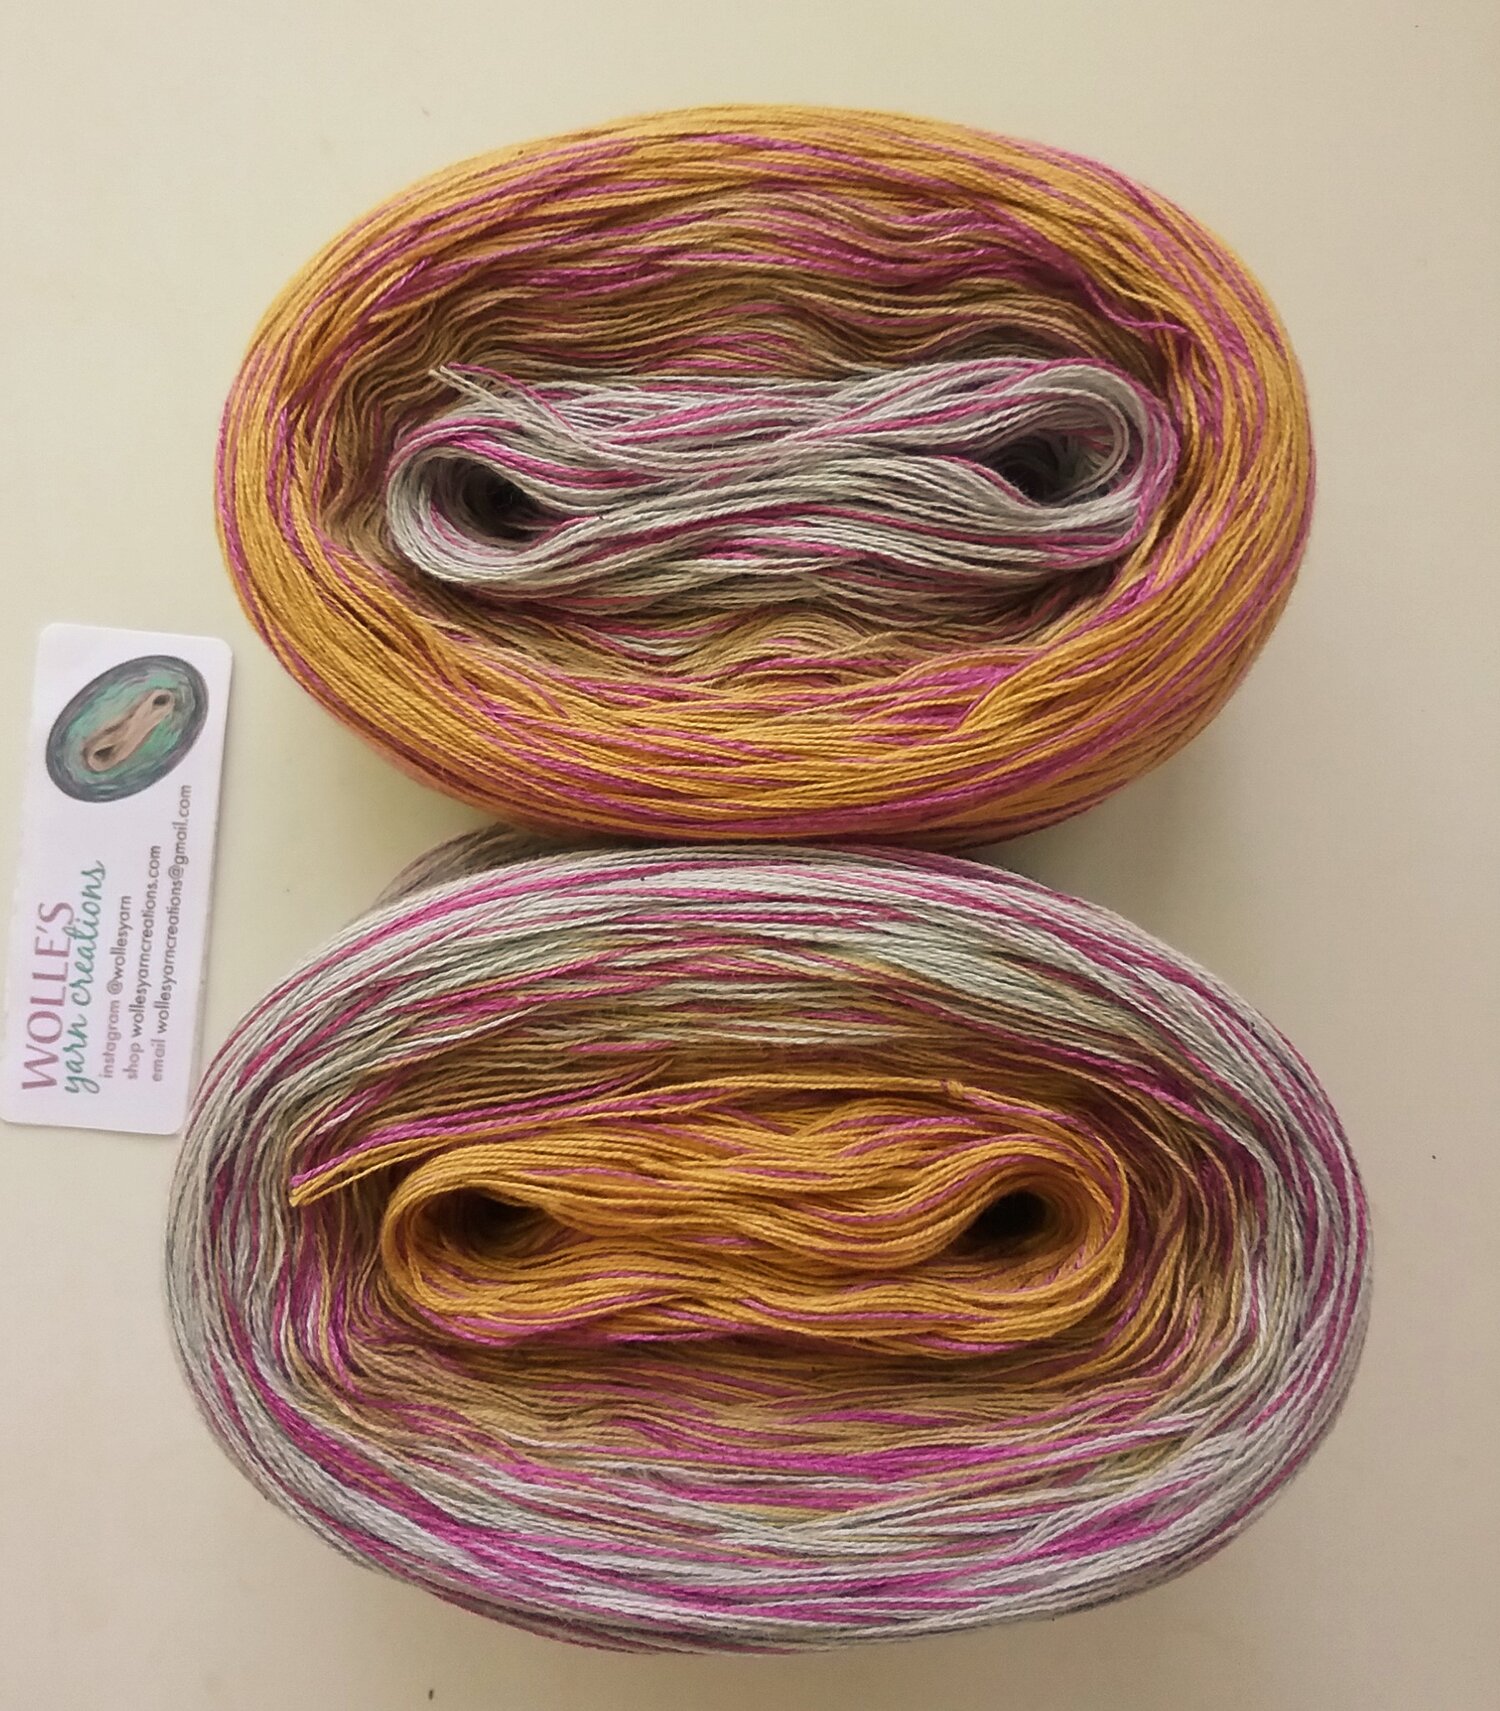 ELTON Medley, Color Changing Cotton/Bamboo yarn